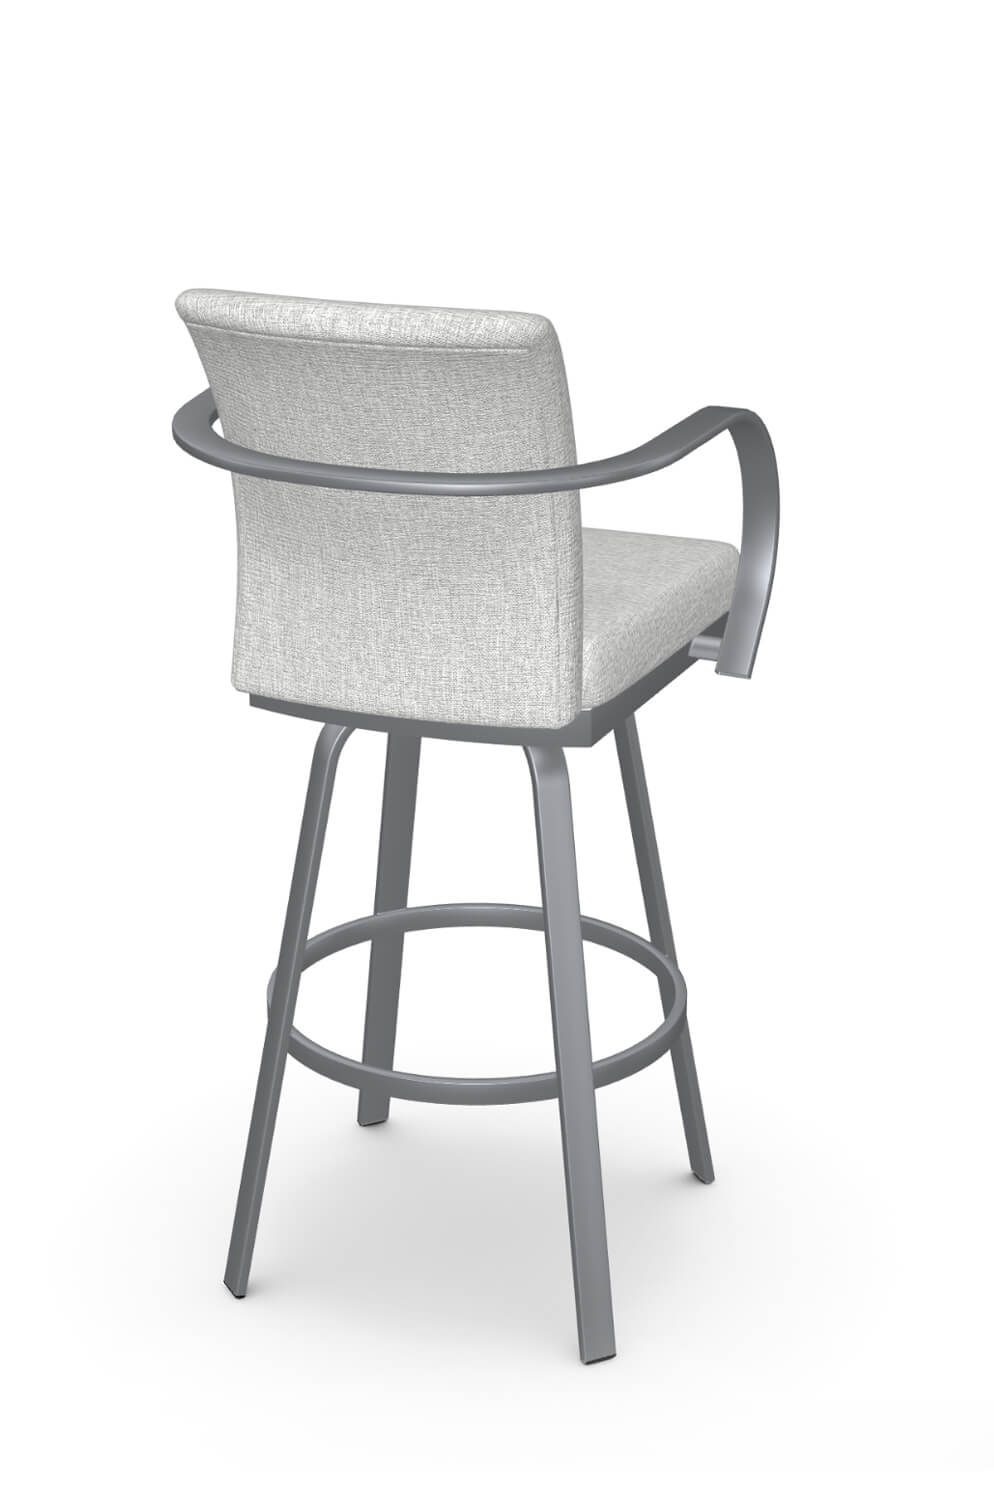 Amisco S Lance Swivel Stool W Arms, Bar Stools With Sides